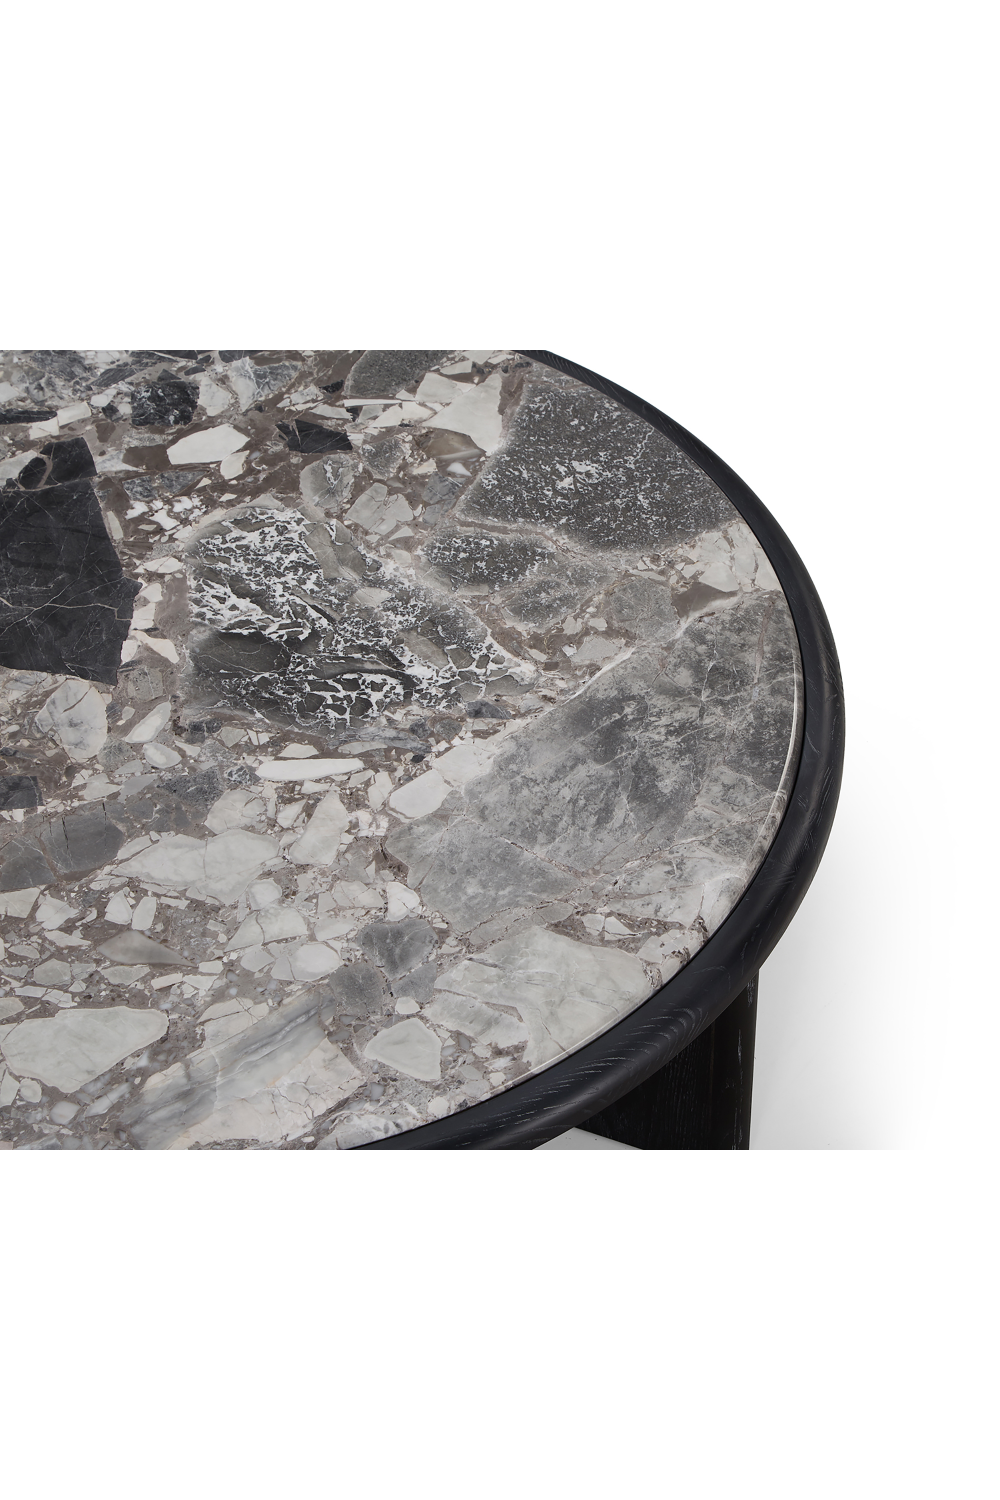 Gray Marble Round Side Table | Liang & Eimil Herman | Oroa.com